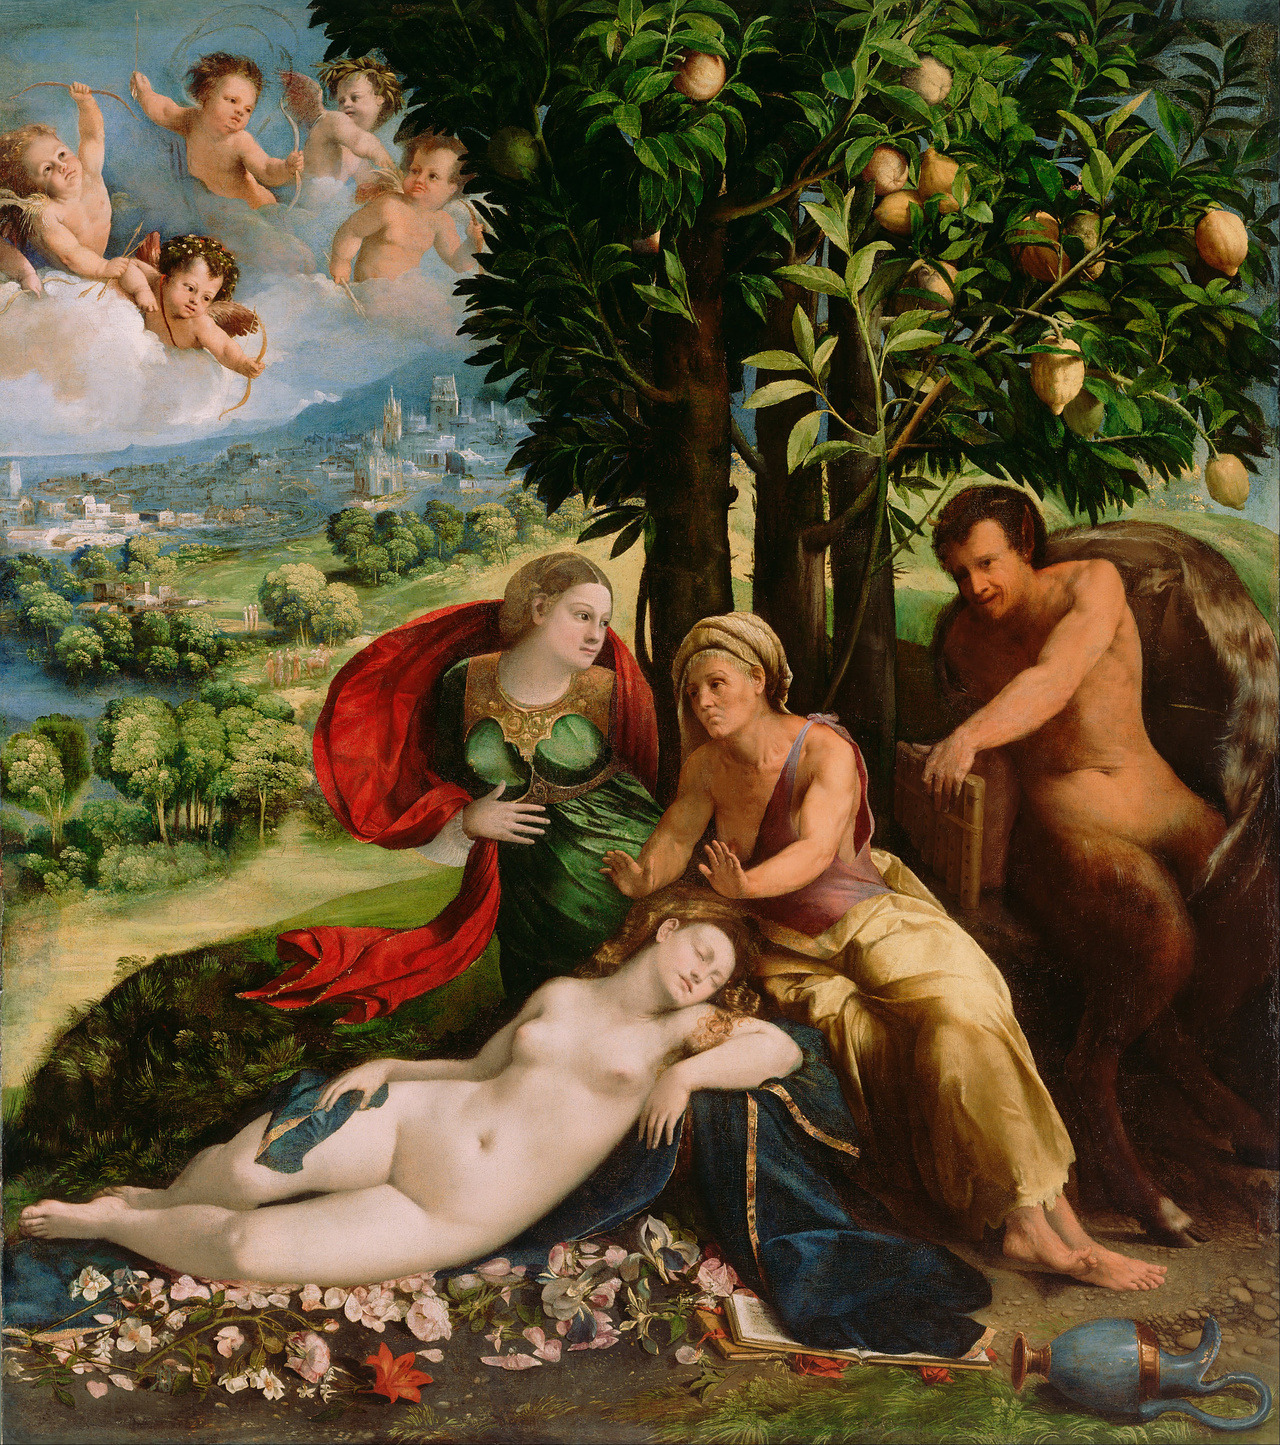 Dosso Dossi (about 1490-1542), Mythological Scene (Allegory of Pan), about 1524;